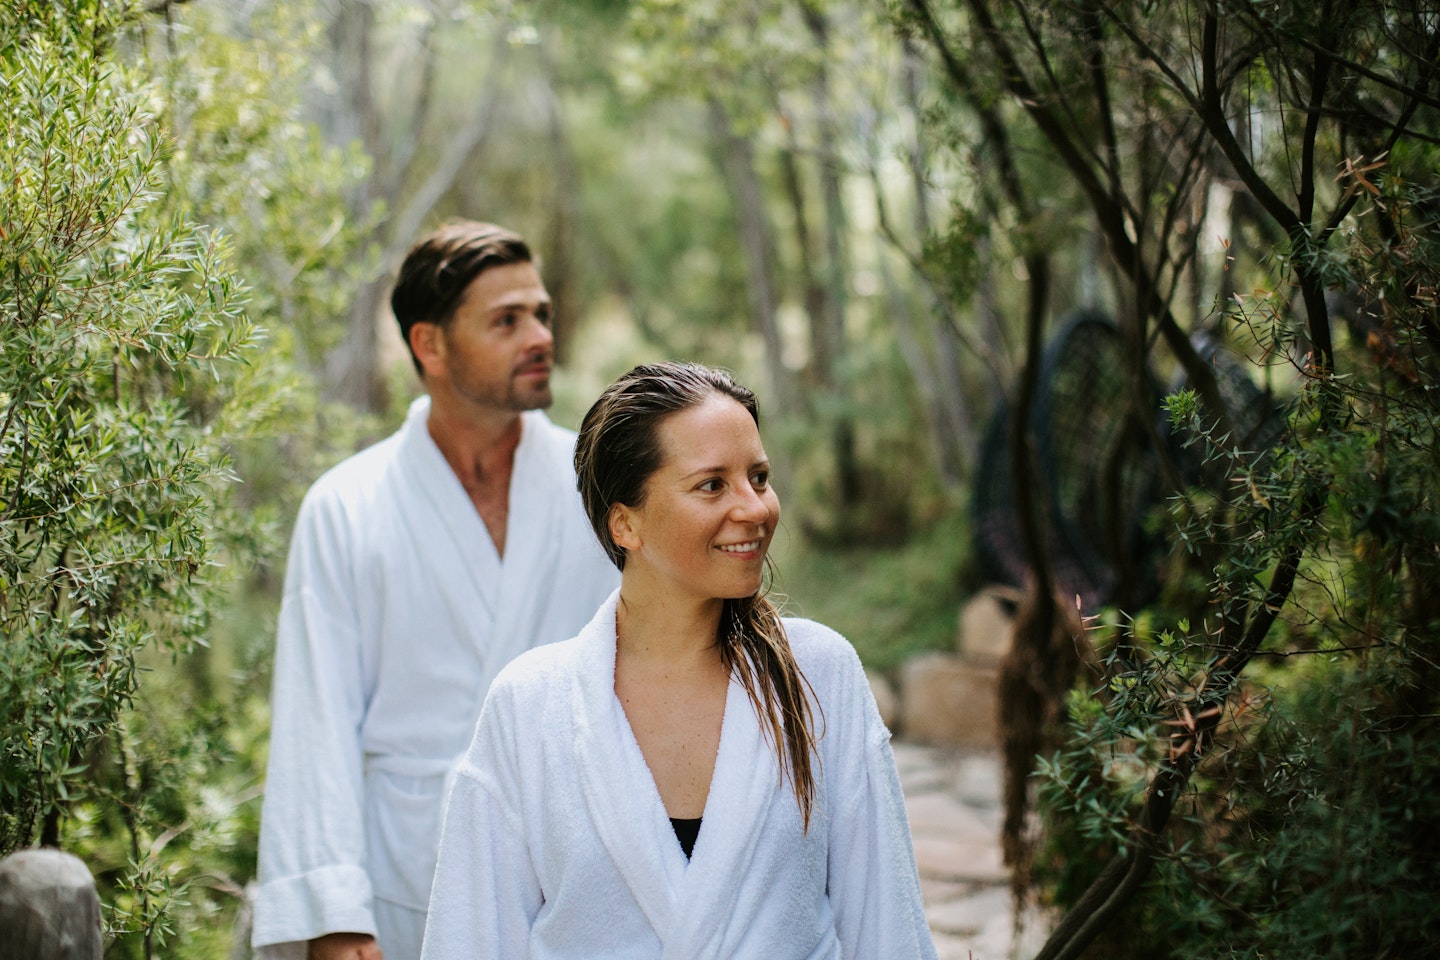 man and woman in white bath robes walking in nature